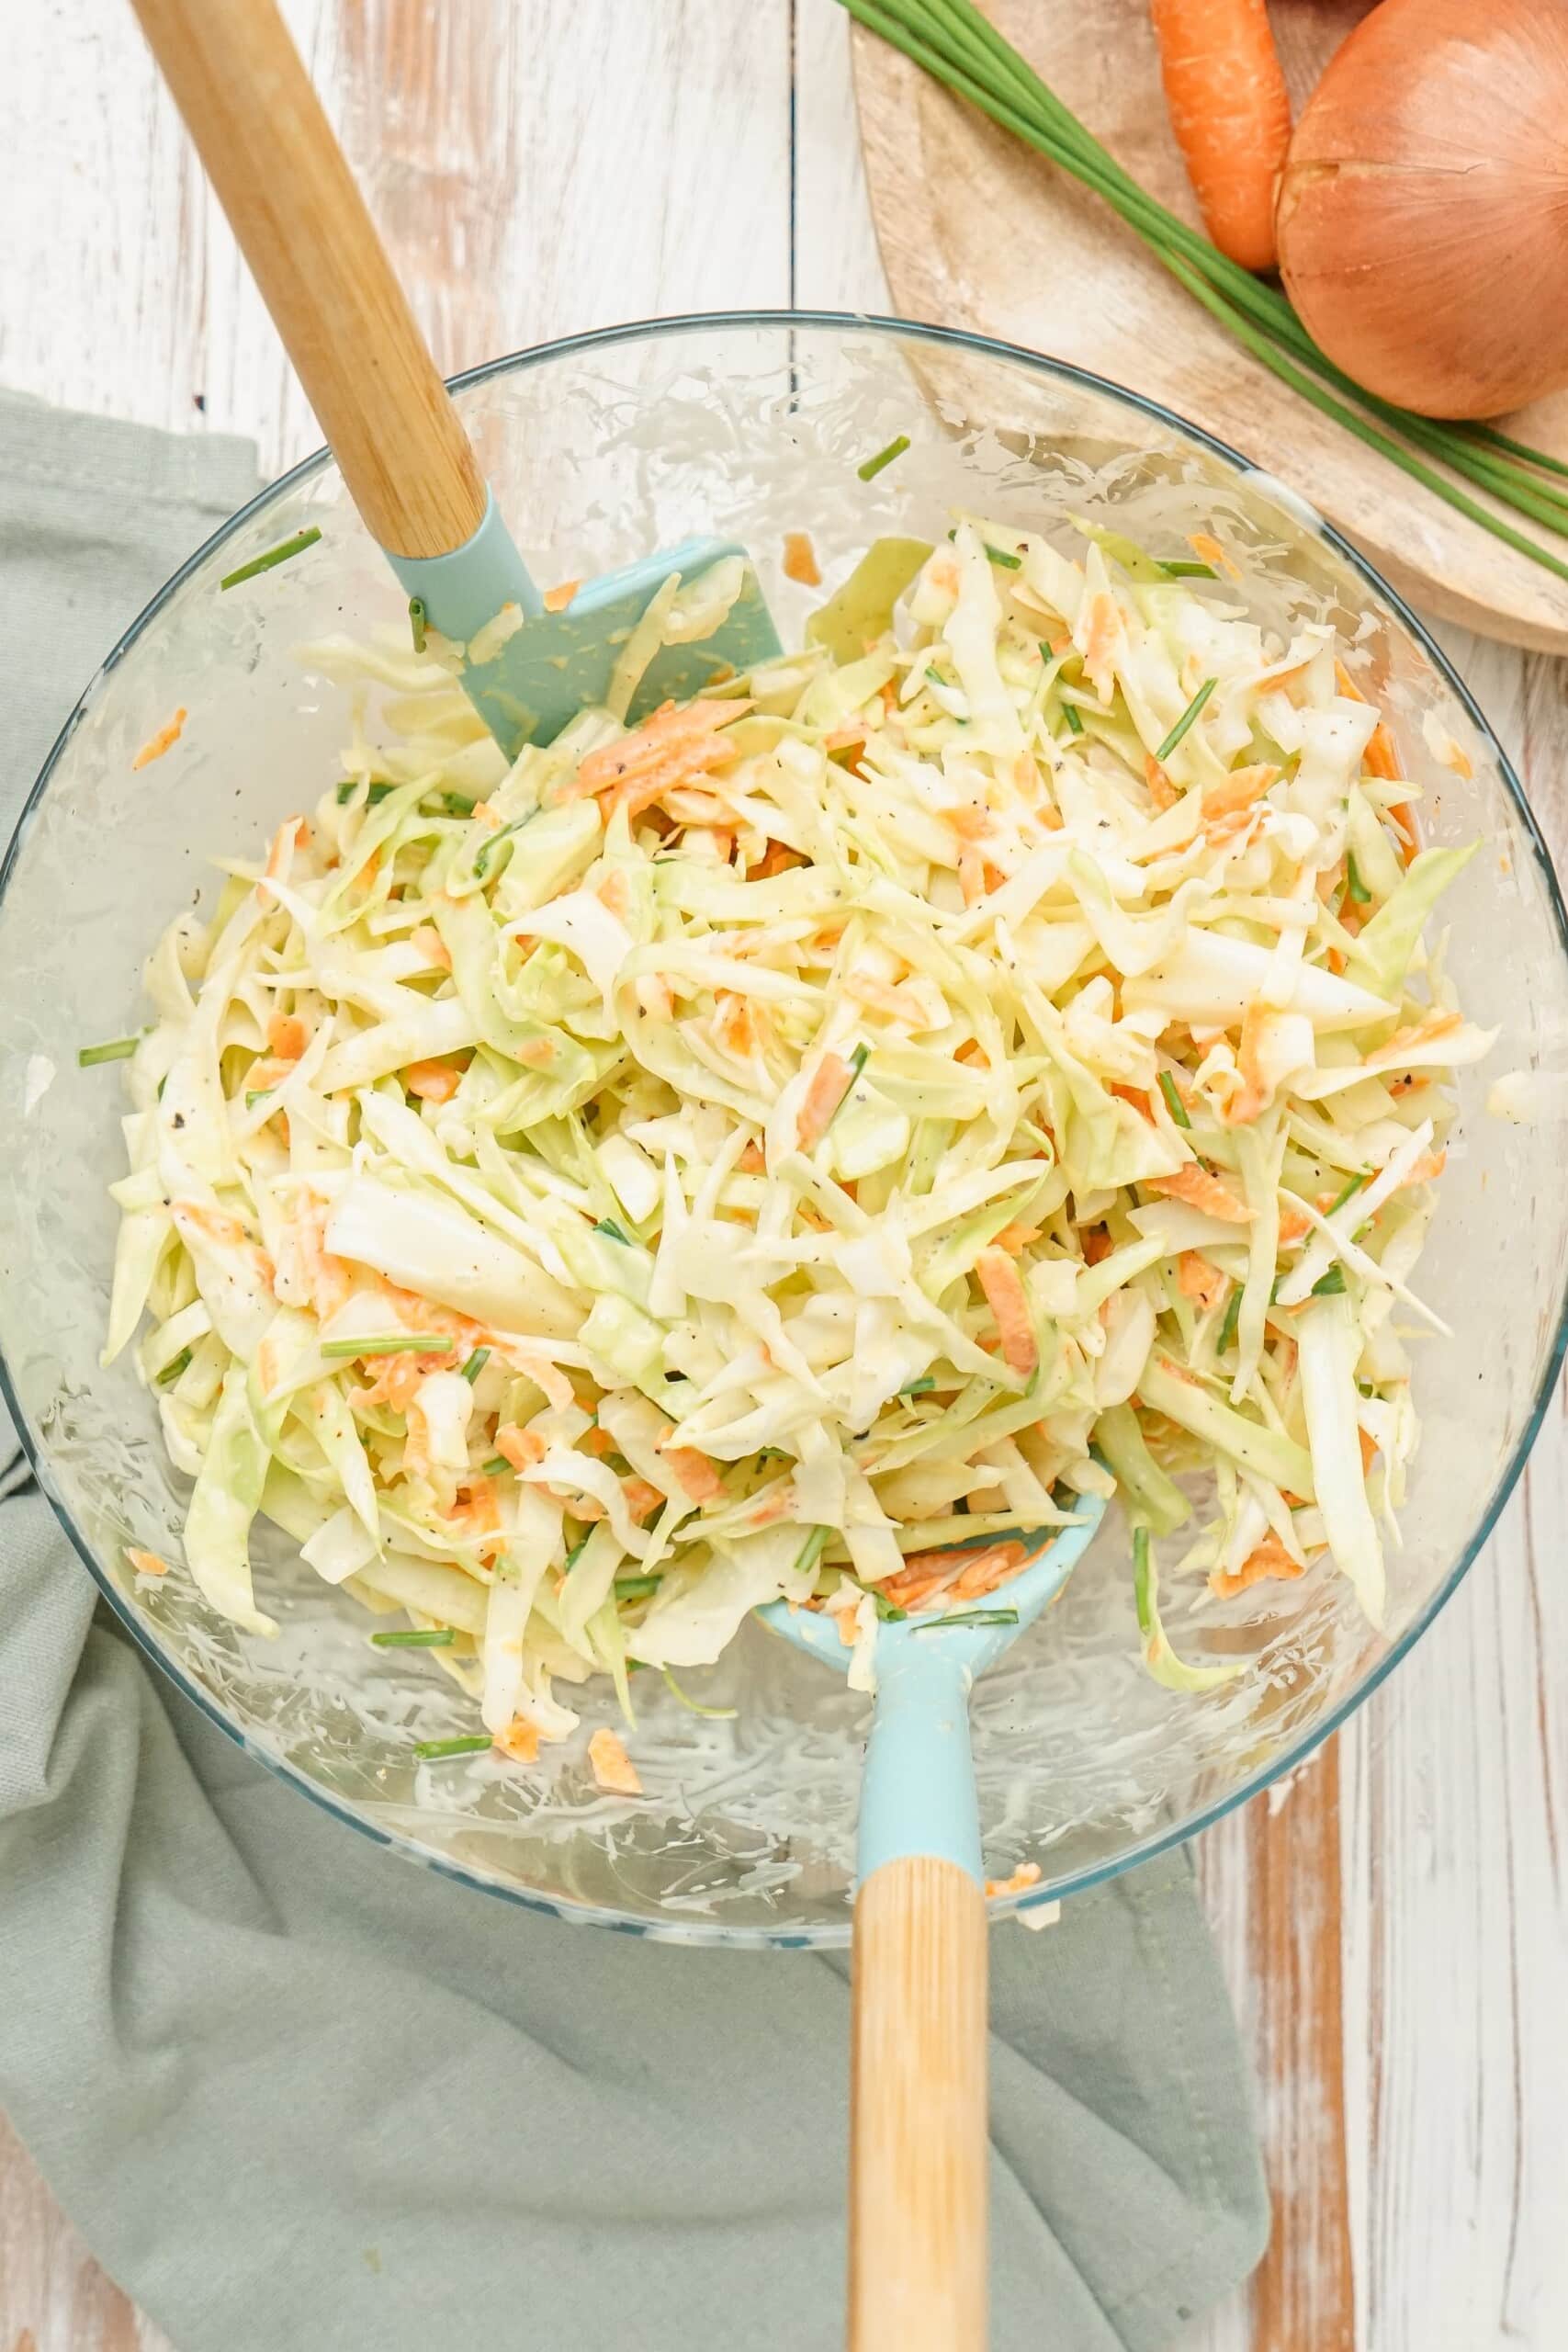 tossing together slaw sauce and coleslaw